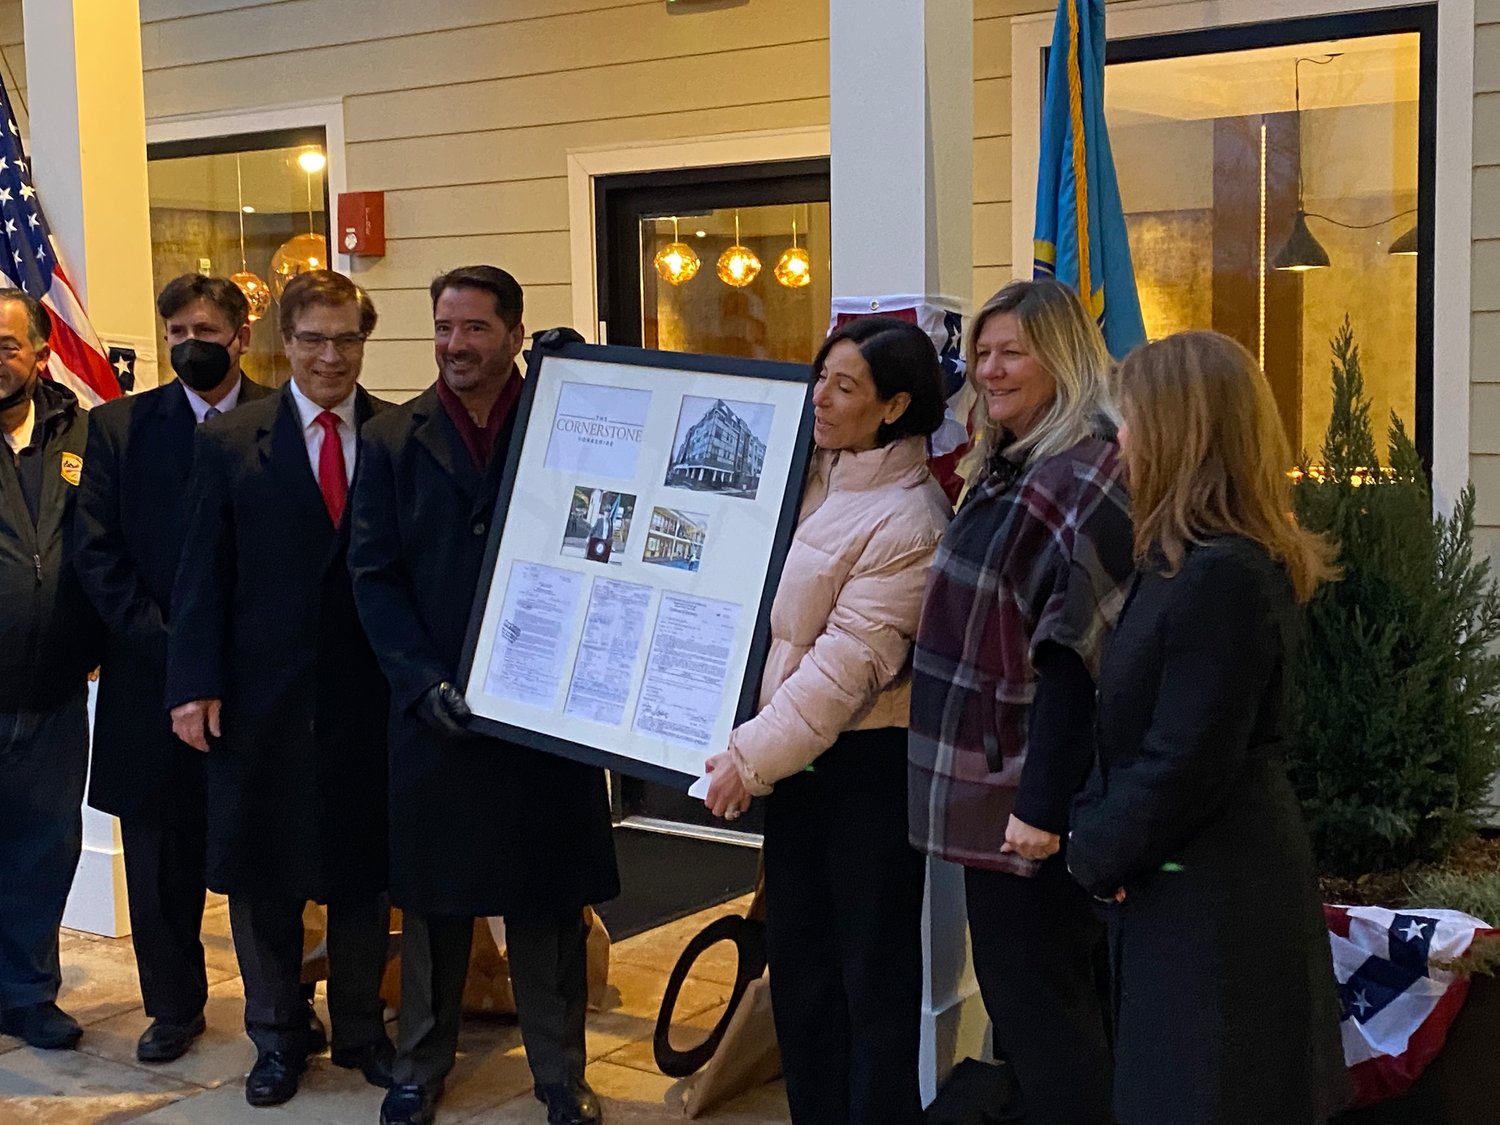 Beach and the village board presented Terwilliger and Bartone with a framed photo of the Cornerstone, the demolition permit for the Capri Lynbrook Motor Inn and the certificate of operation.